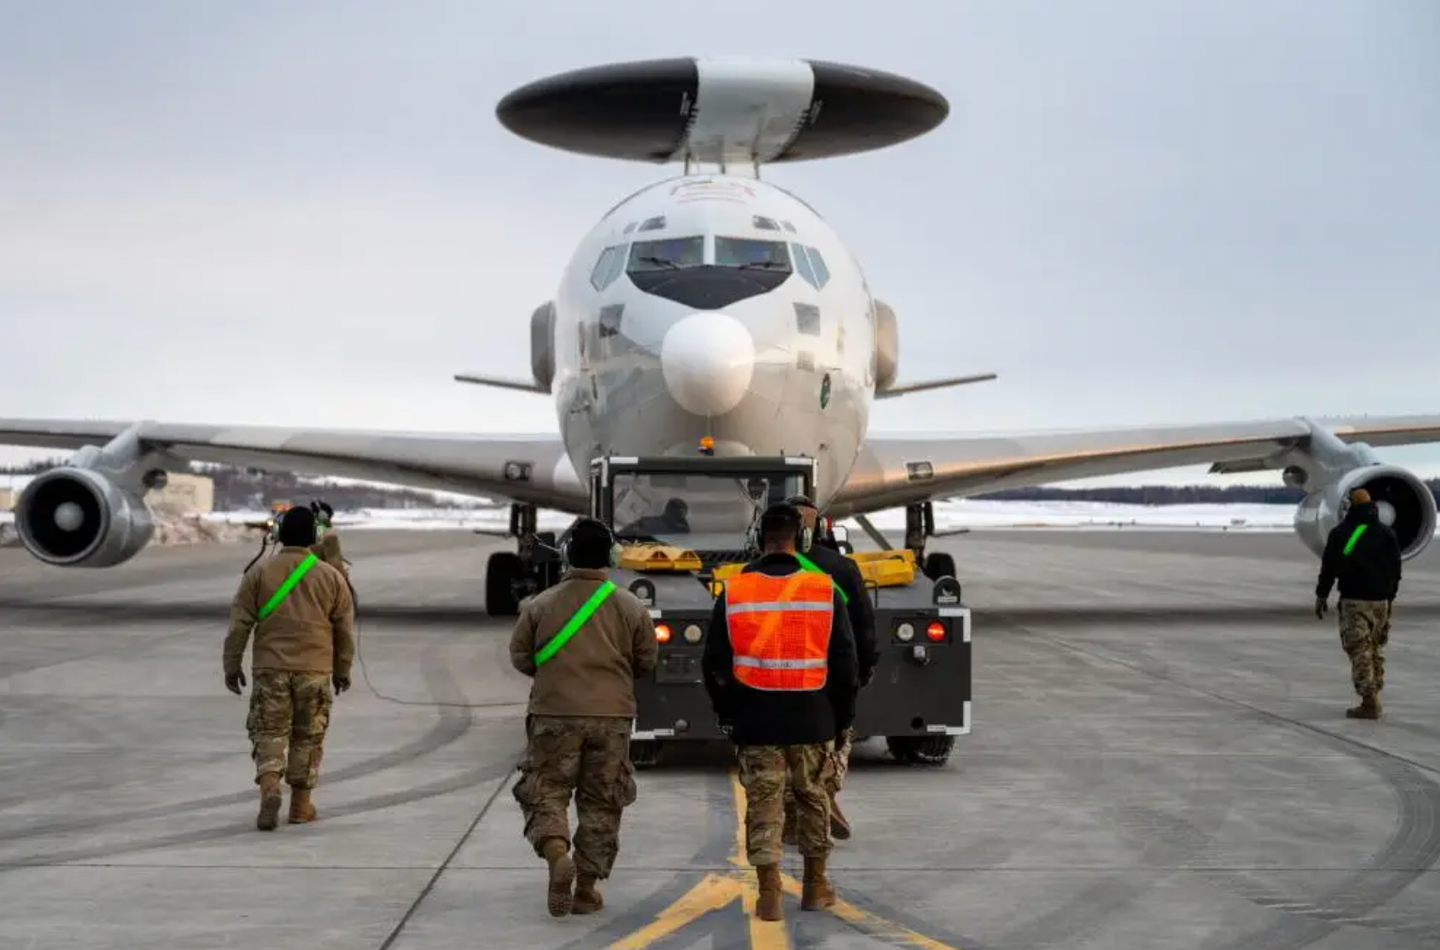 U.S. airmen assigned to the 962nd Aircraft Maintenance Unit monitor an E-3 AWACS as the aircraft is towed at Joint Base Elmendorf-Richardson, Alaska, on March 22, 2022. <em>U.S. Air Force photo by Airman 1st Class Andrew Britten</em><br>